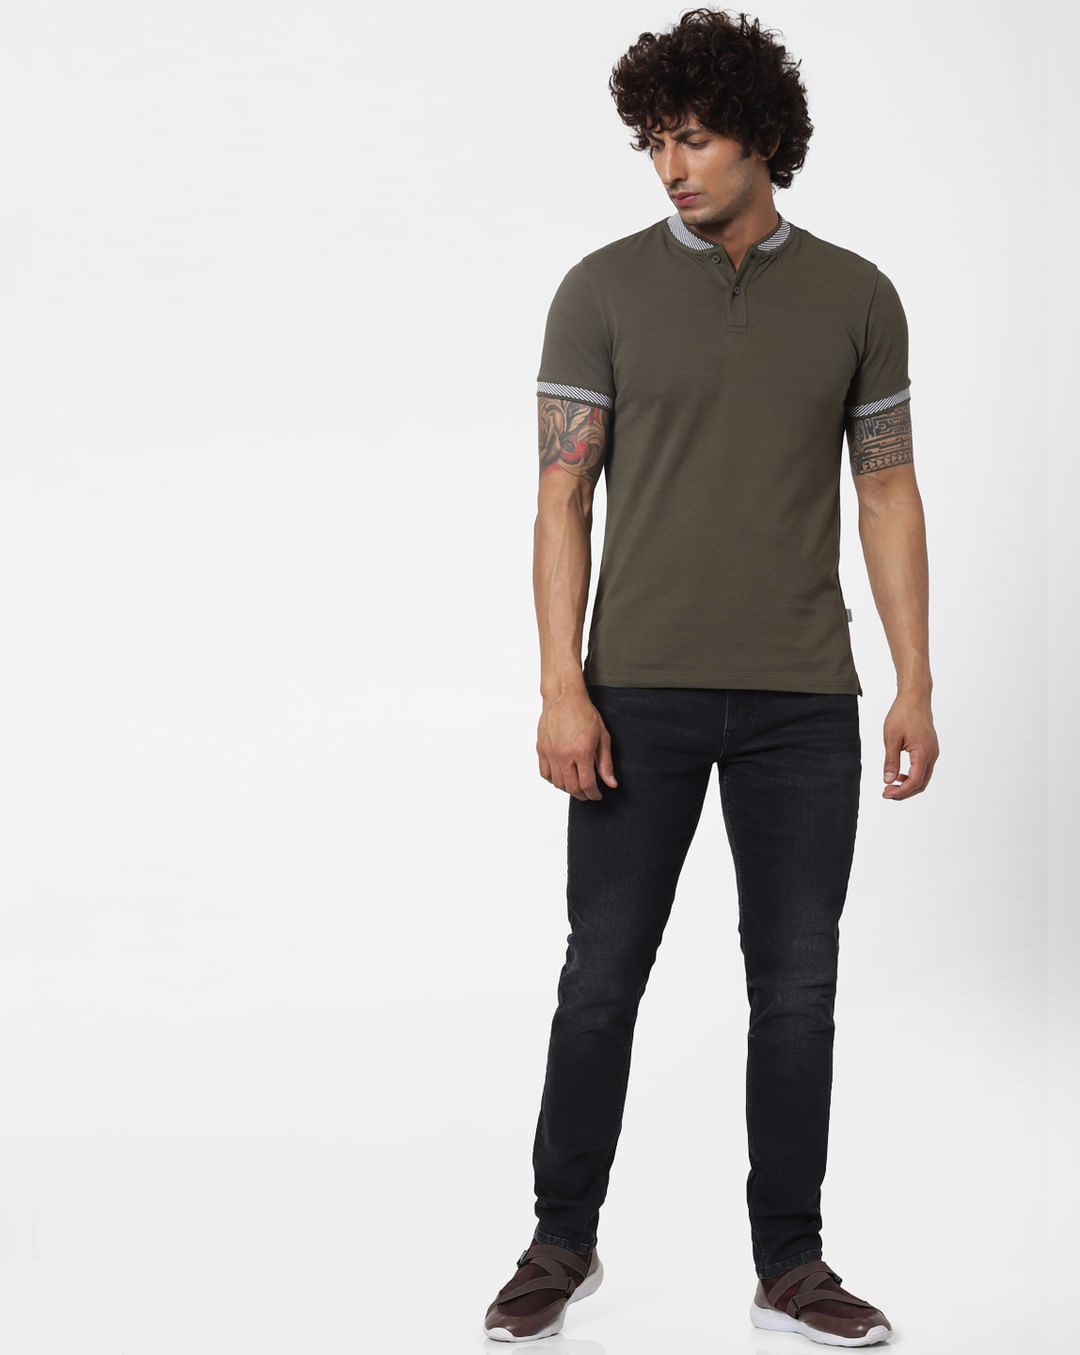 Buy Olive Green Polo Neck T-shirt Online in India - Flat 40% Off